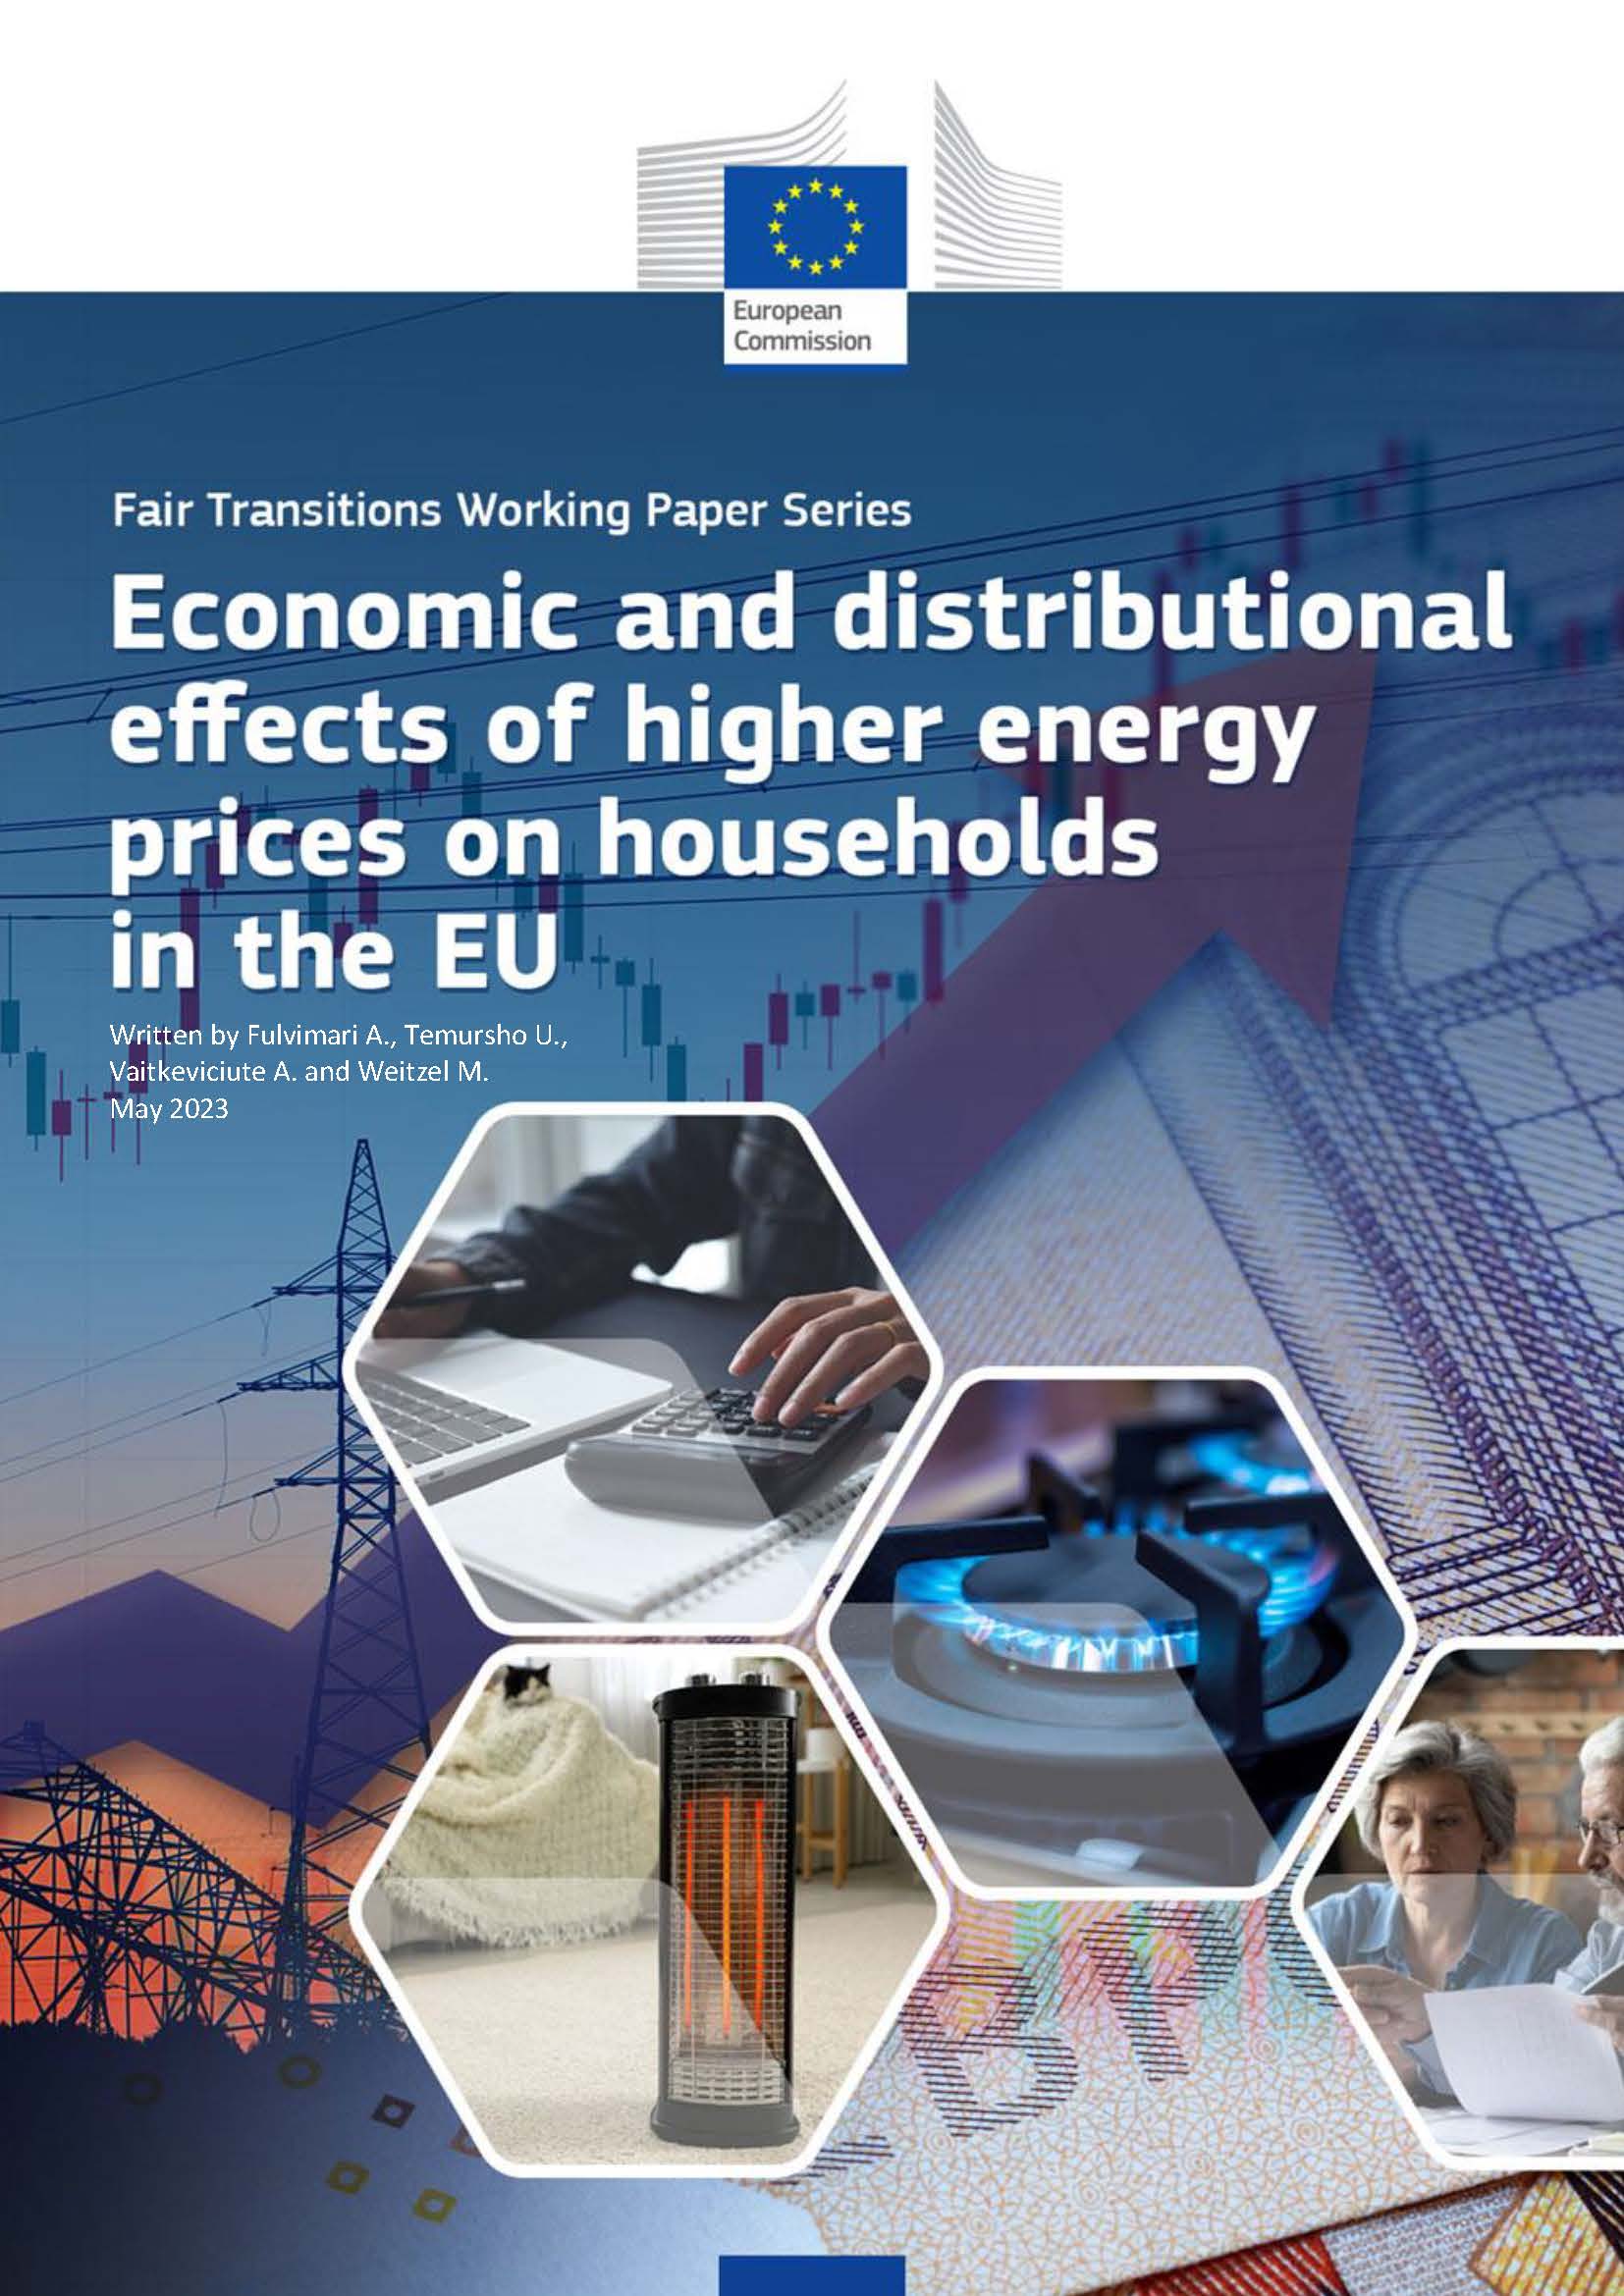 Economic and distributional effects of higher energy prices on households in the EU
